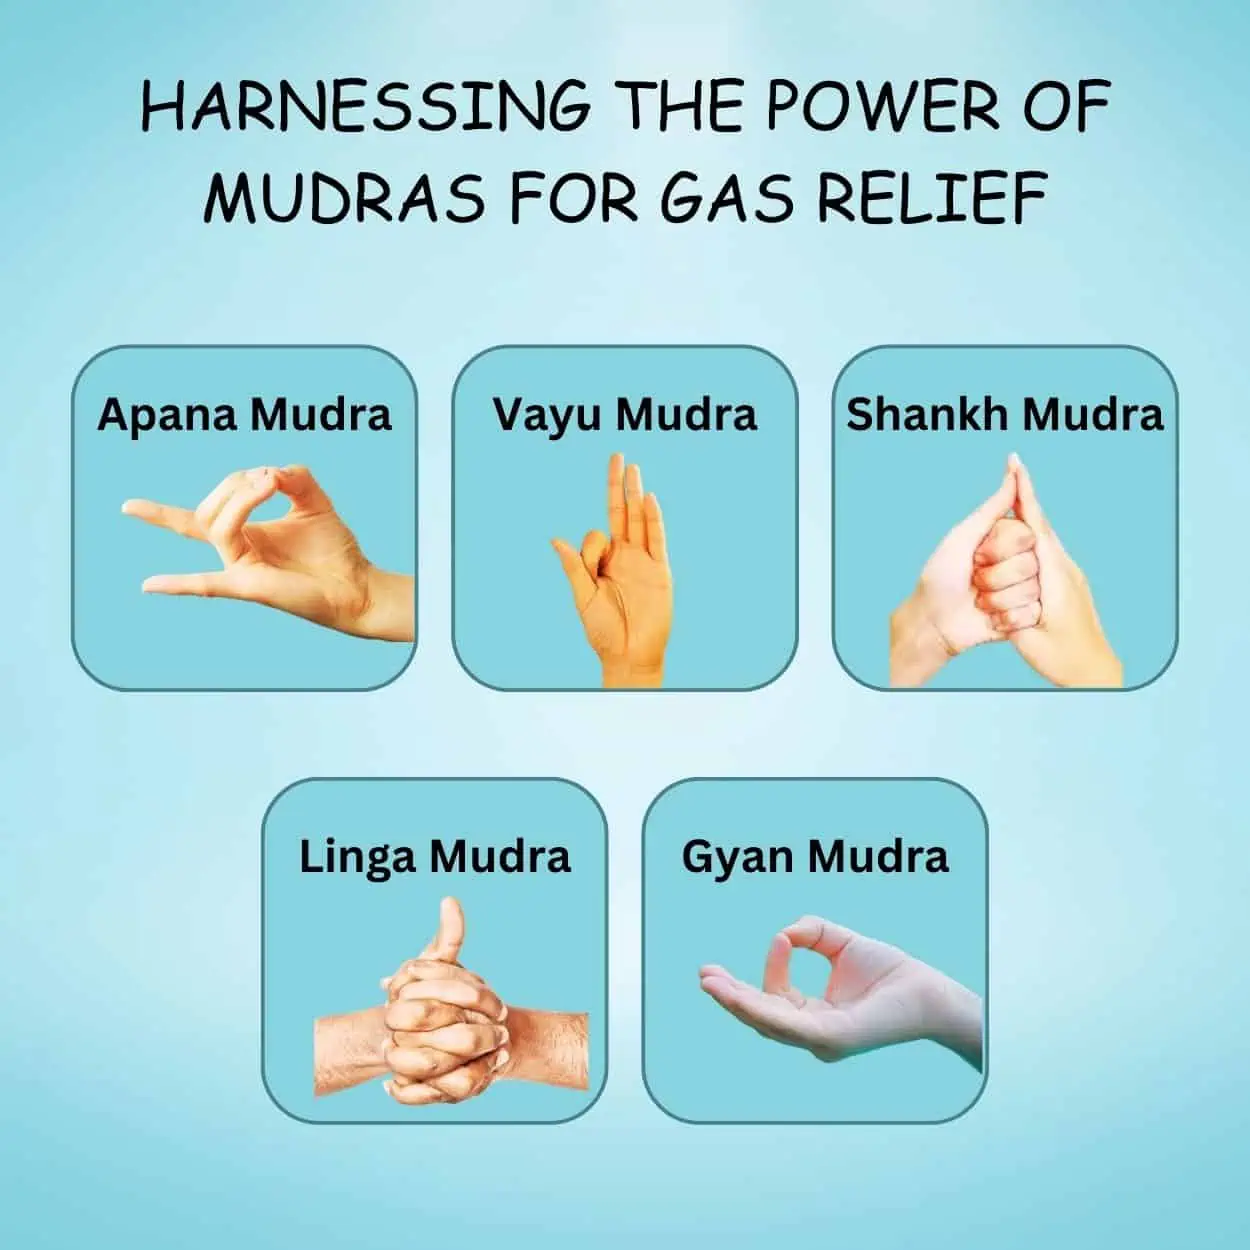 Harnessing the Power of Mudras for Gas Relief